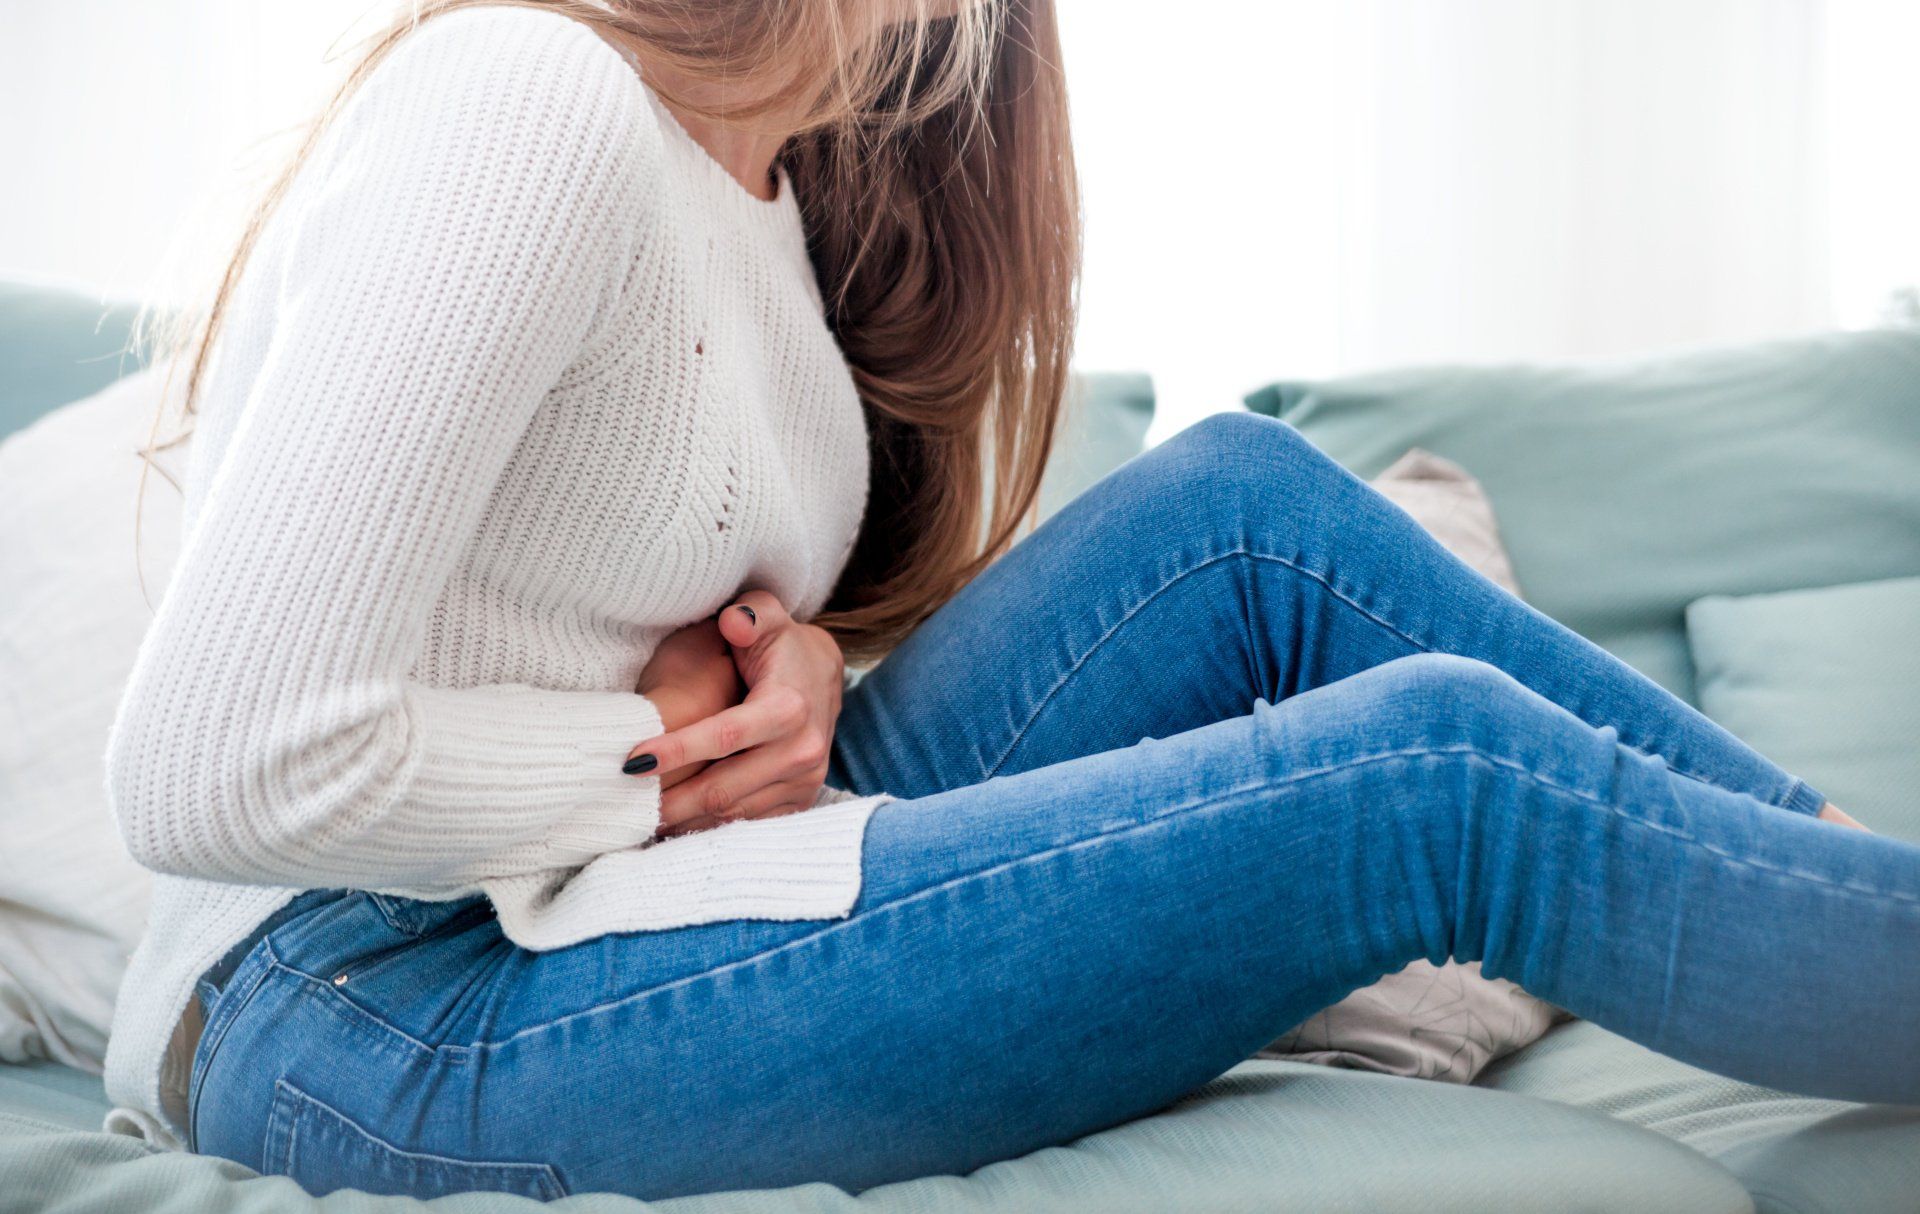 Crohn's Disease and Ulcerative Colitis- The Difference